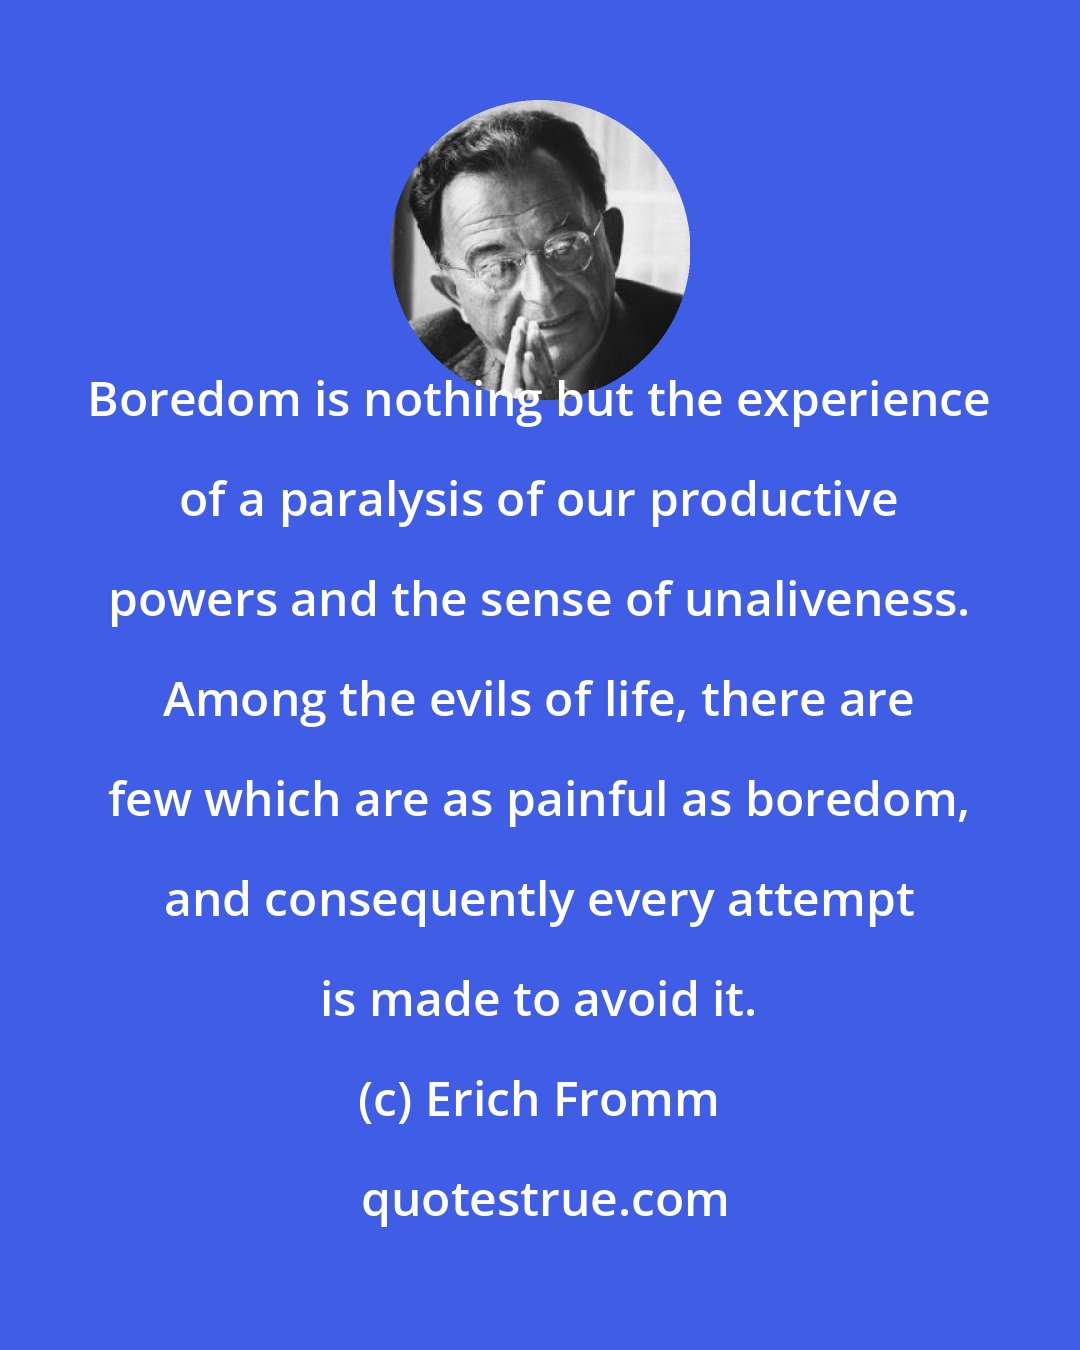 Erich Fromm: Boredom is nothing but the experience of a paralysis of our productive powers and the sense of unaliveness. Among the evils of life, there are few which are as painful as boredom, and consequently every attempt is made to avoid it.